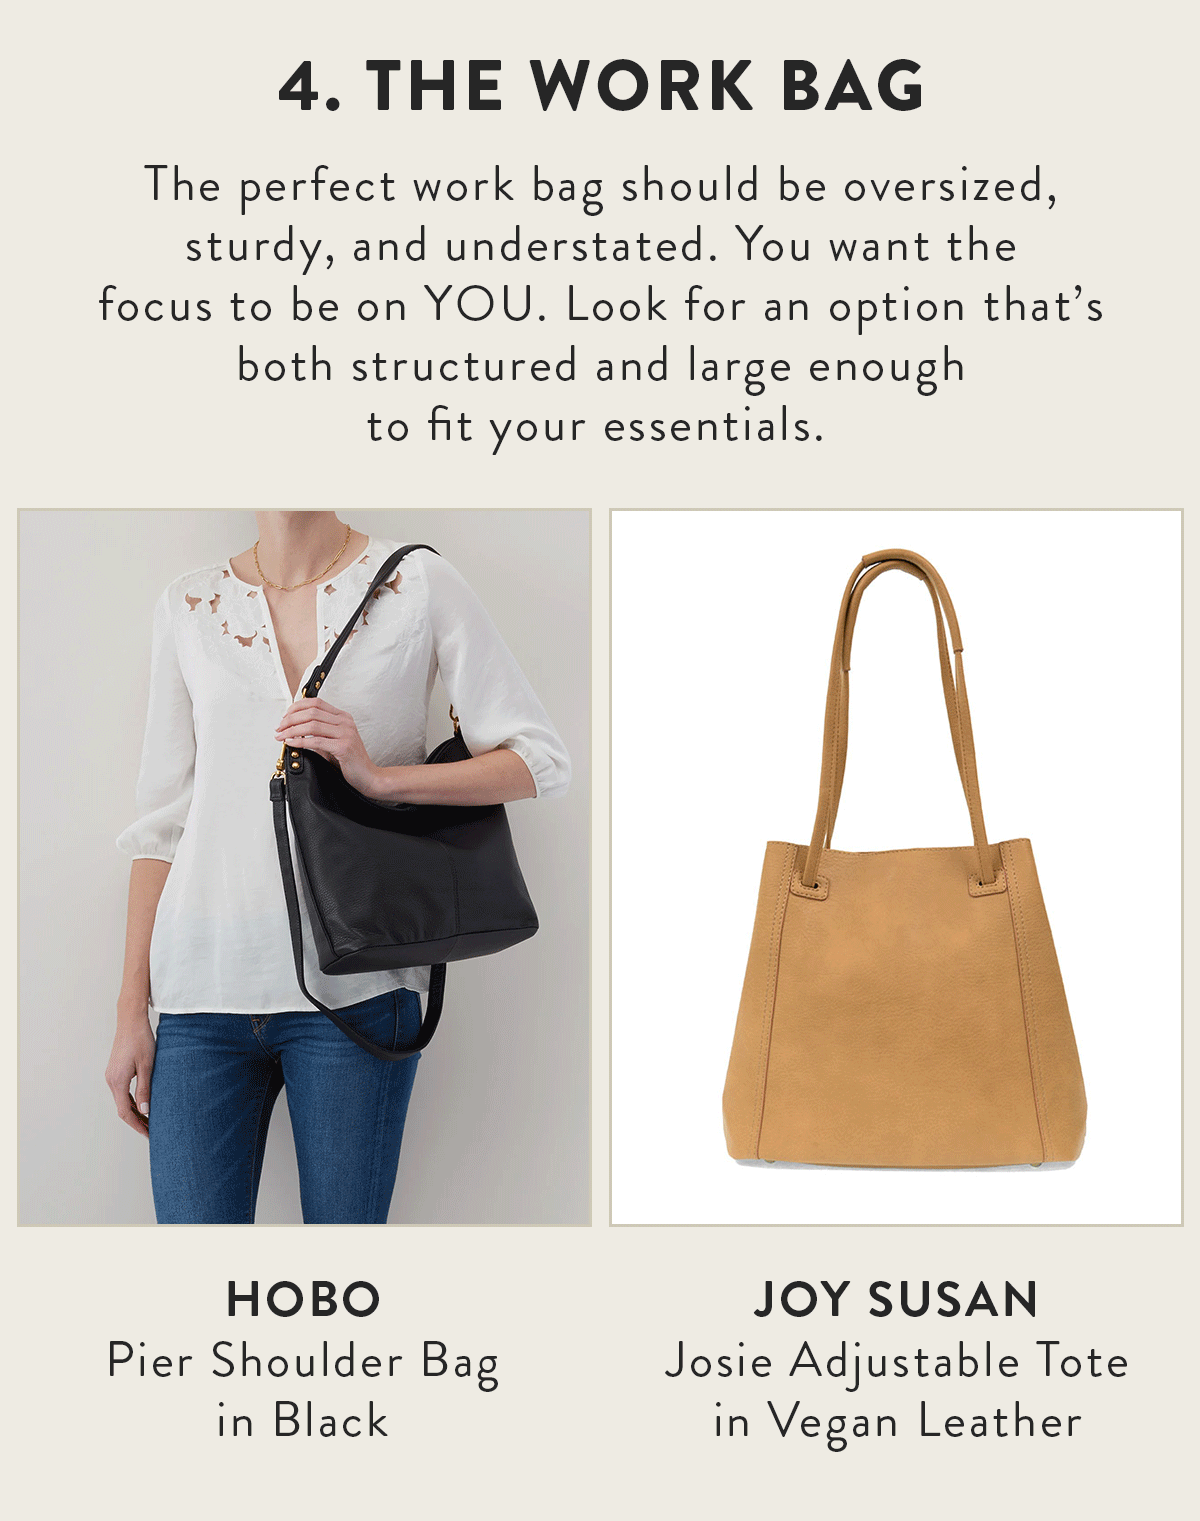 5 handbags every woman should own - the work bag